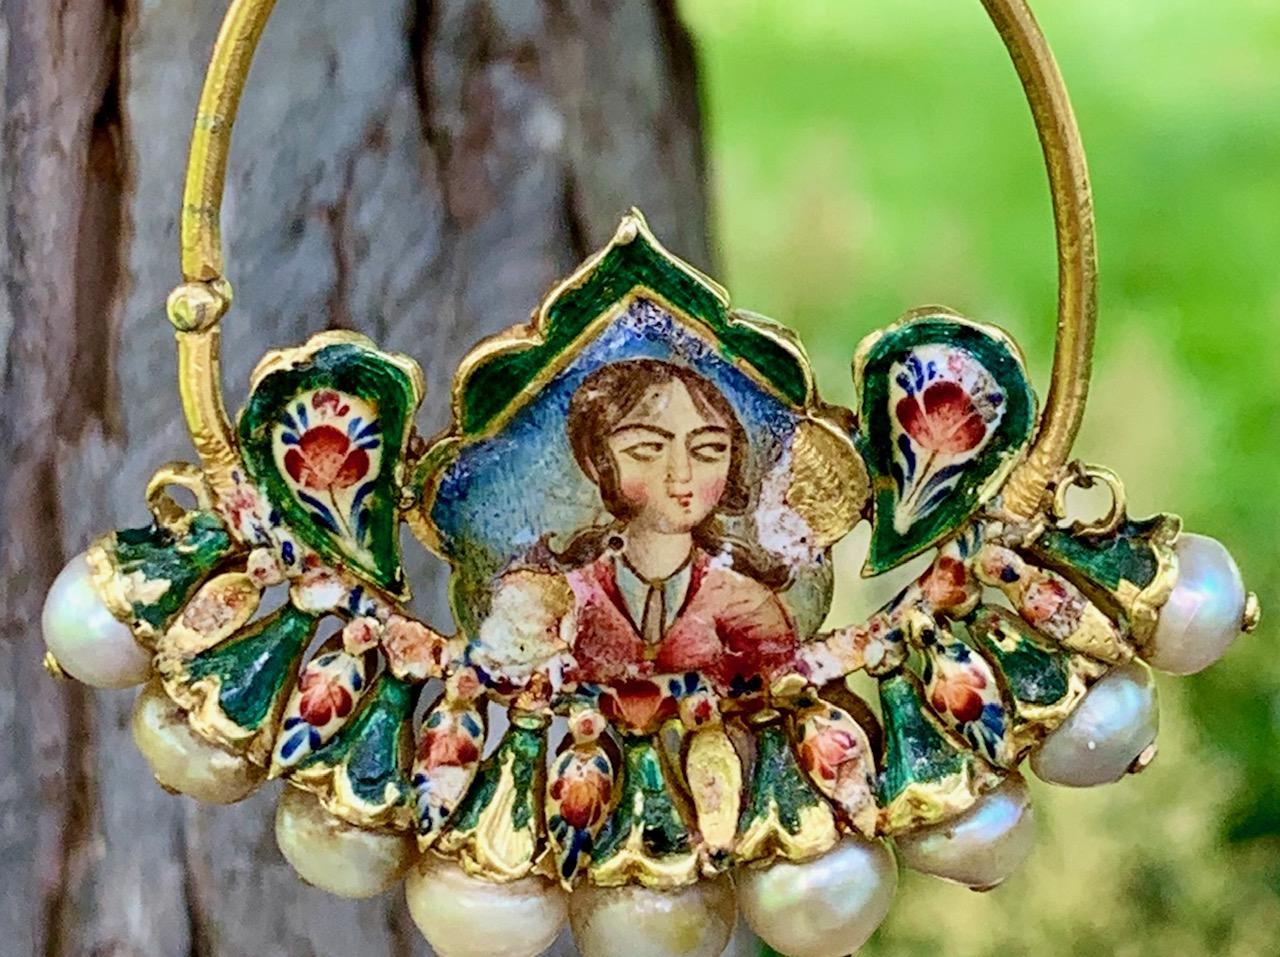 This necklace and pendant are exquisite.  We don't really know how to describe it. We believe there must be some symbolism or significance; or perhaps it is part of a traditional costume.   It is enameled it several areas.  The golden ring has nine